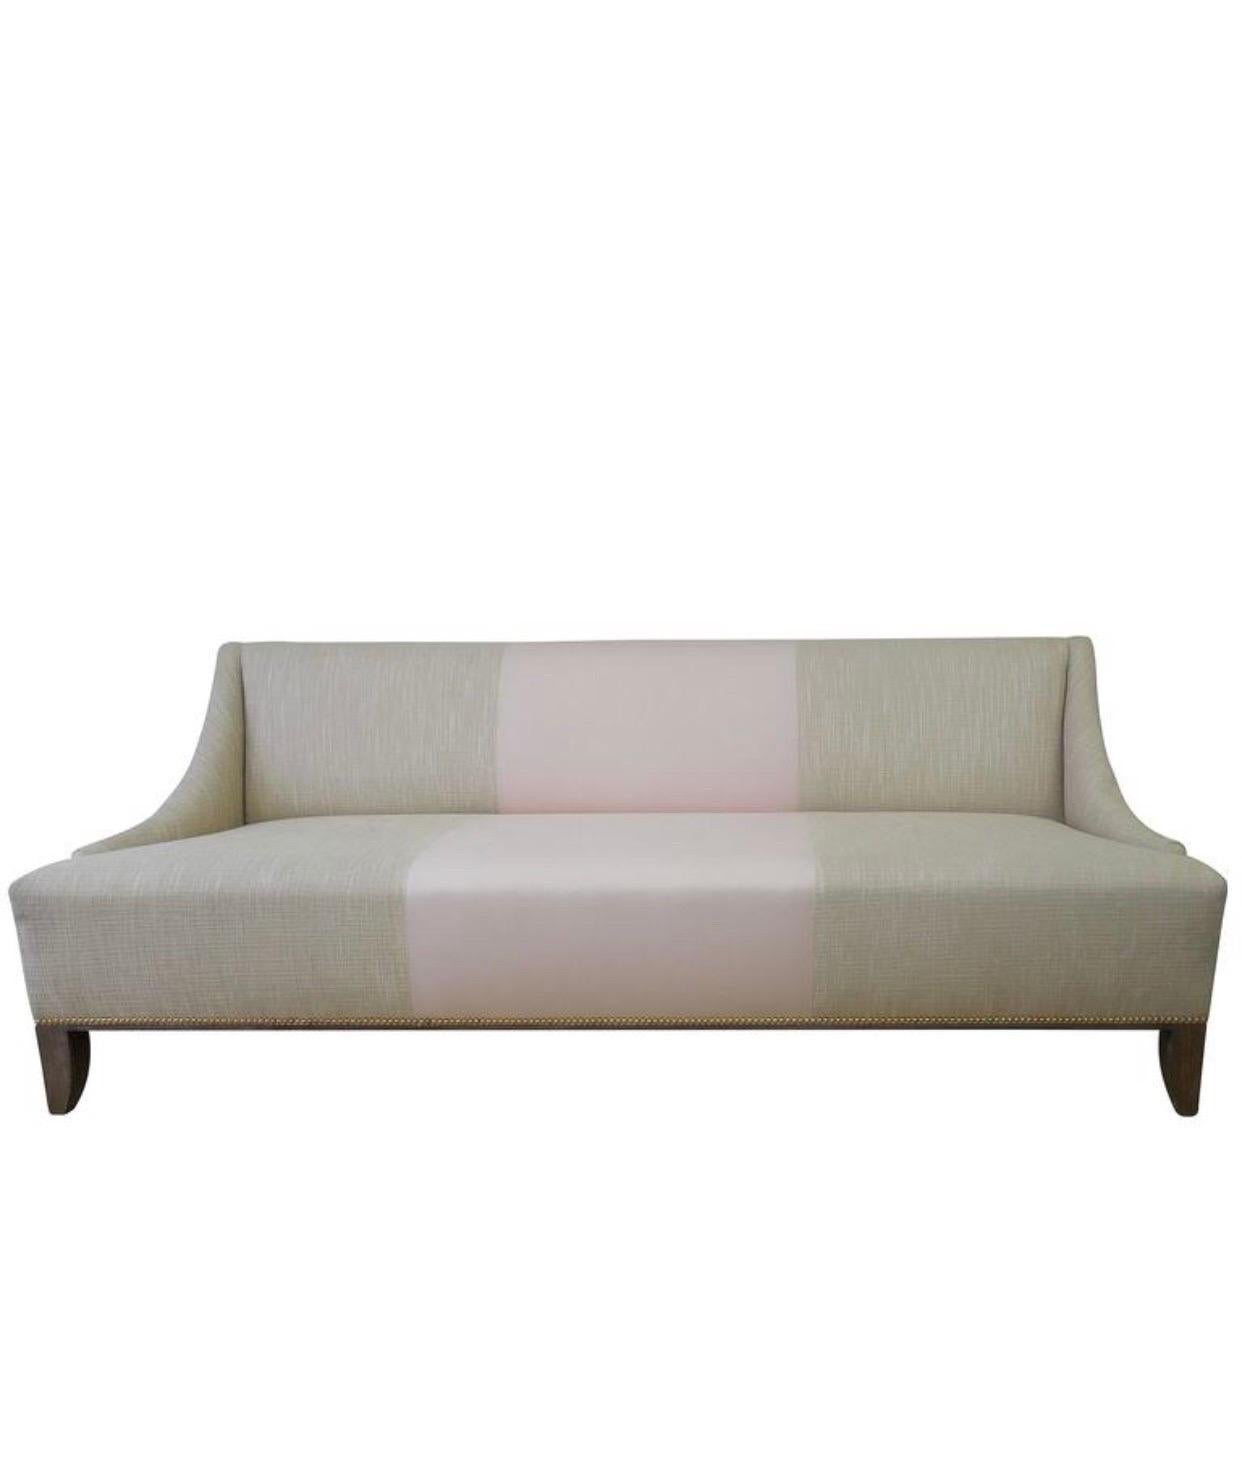 This sofa is so unique and special and waiting for the perfect fashionable home or office. A one of a kind custom-made for an executive in the Fashion Industry's Rodeo Drive office. It was never used. For staging purposes only! Modern tan linen and